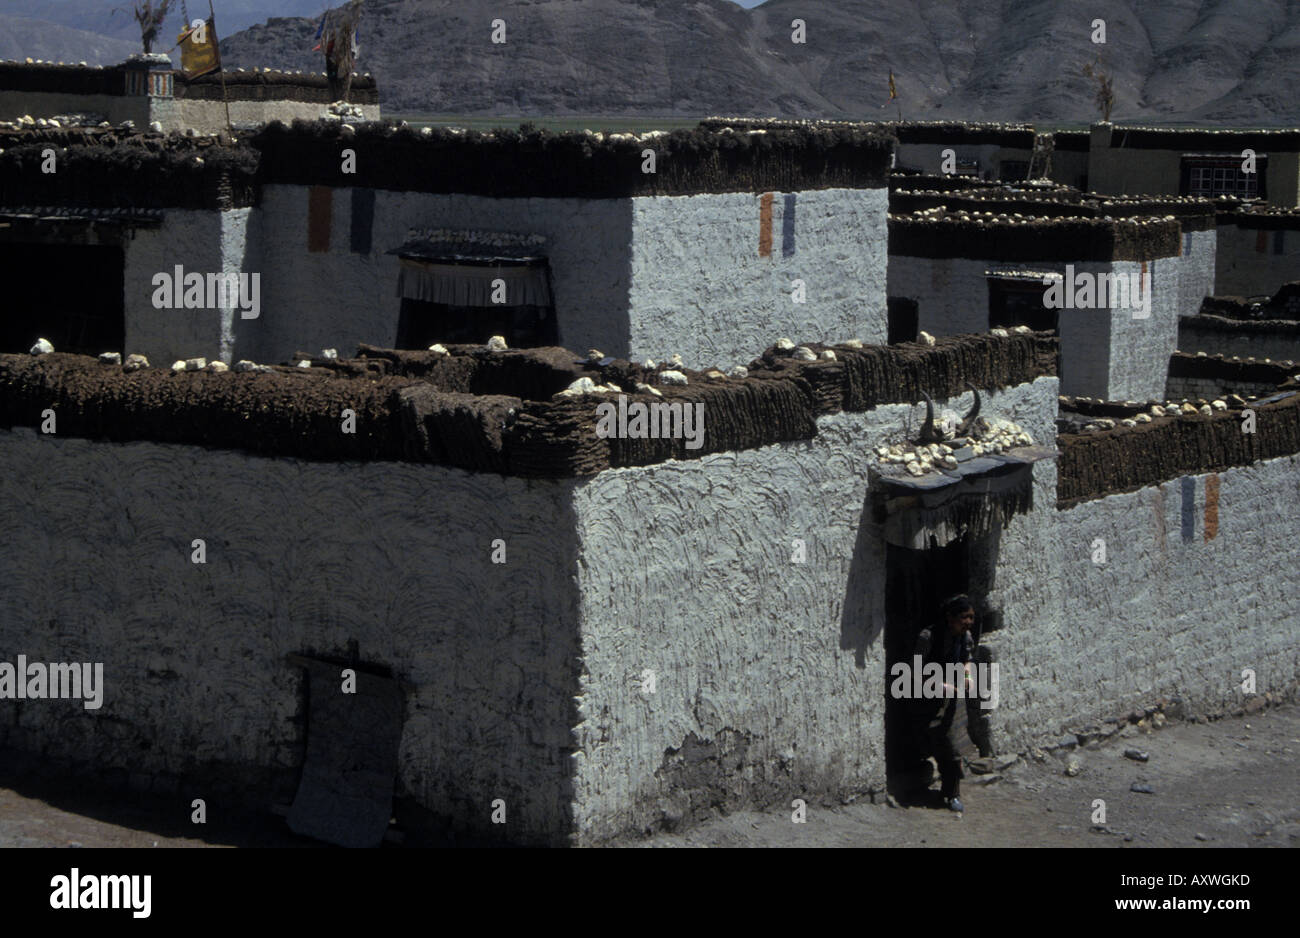 Laze village homes whitewashed stone dwellings houses dried yak dung stacked dried drying flat roofs rooftops Tibetan Plateau Stock Photo